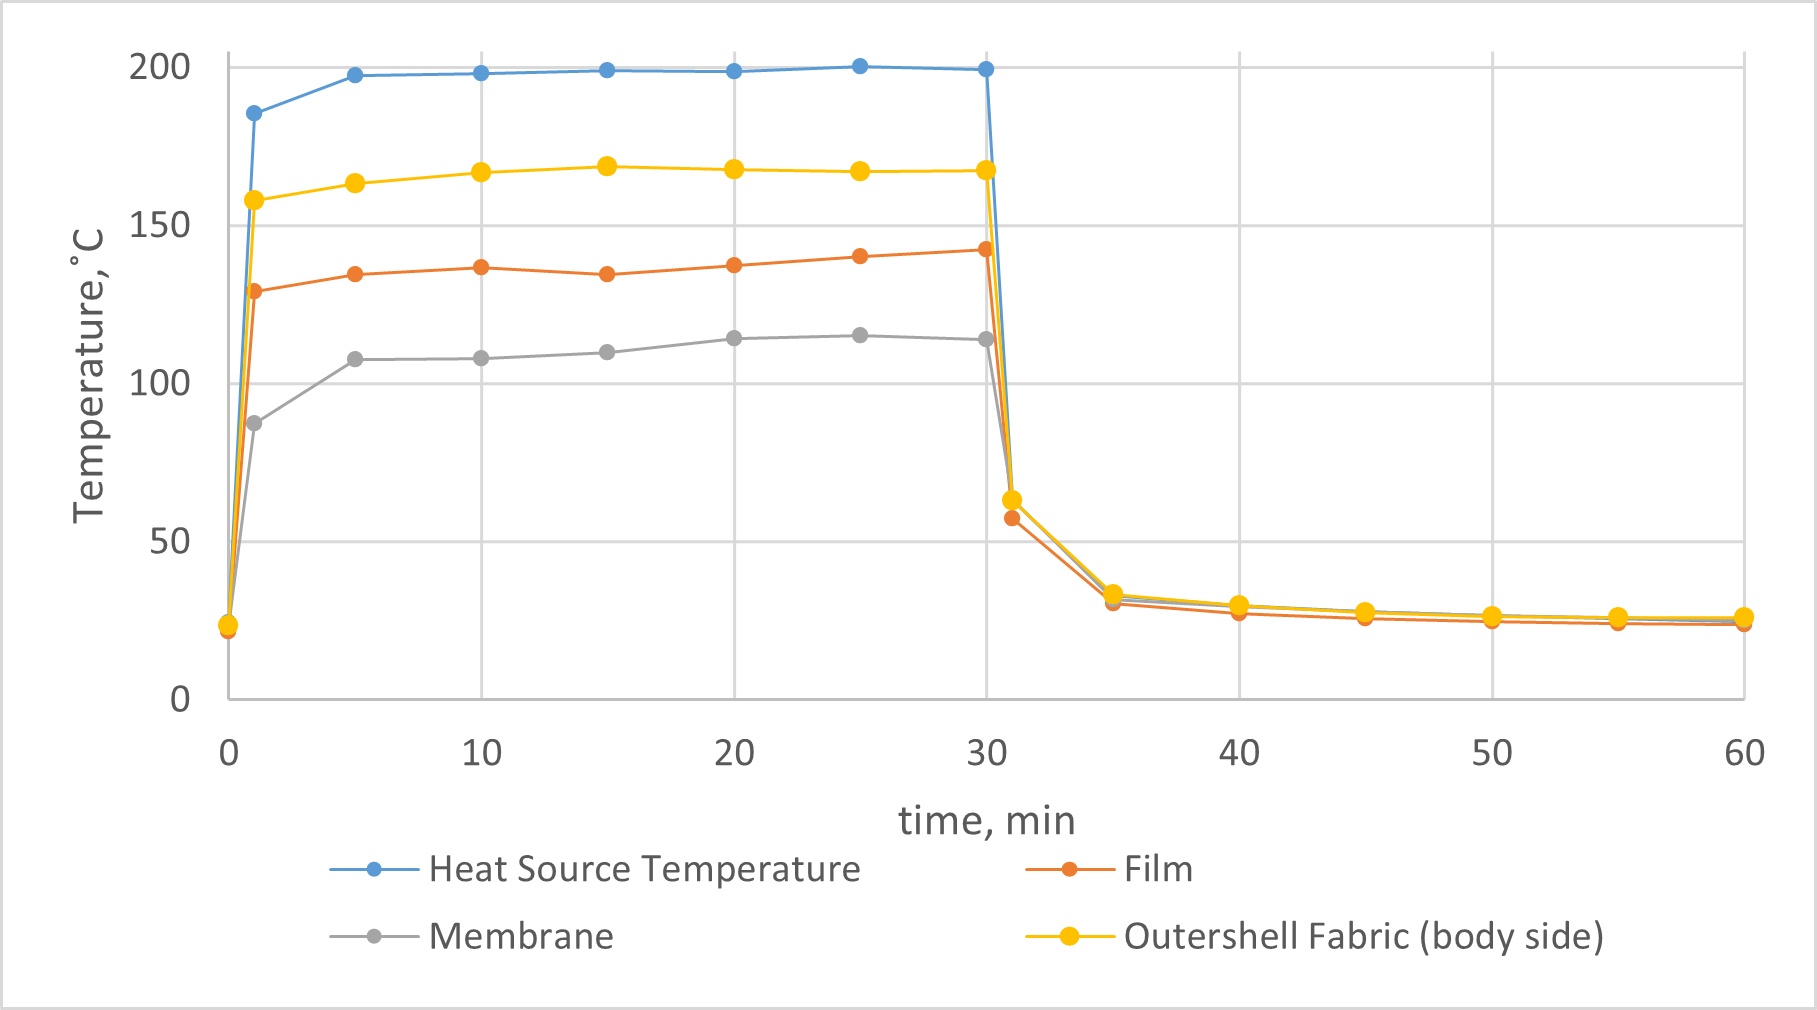 Thermal performance of the materials used in the vest without PCM integration